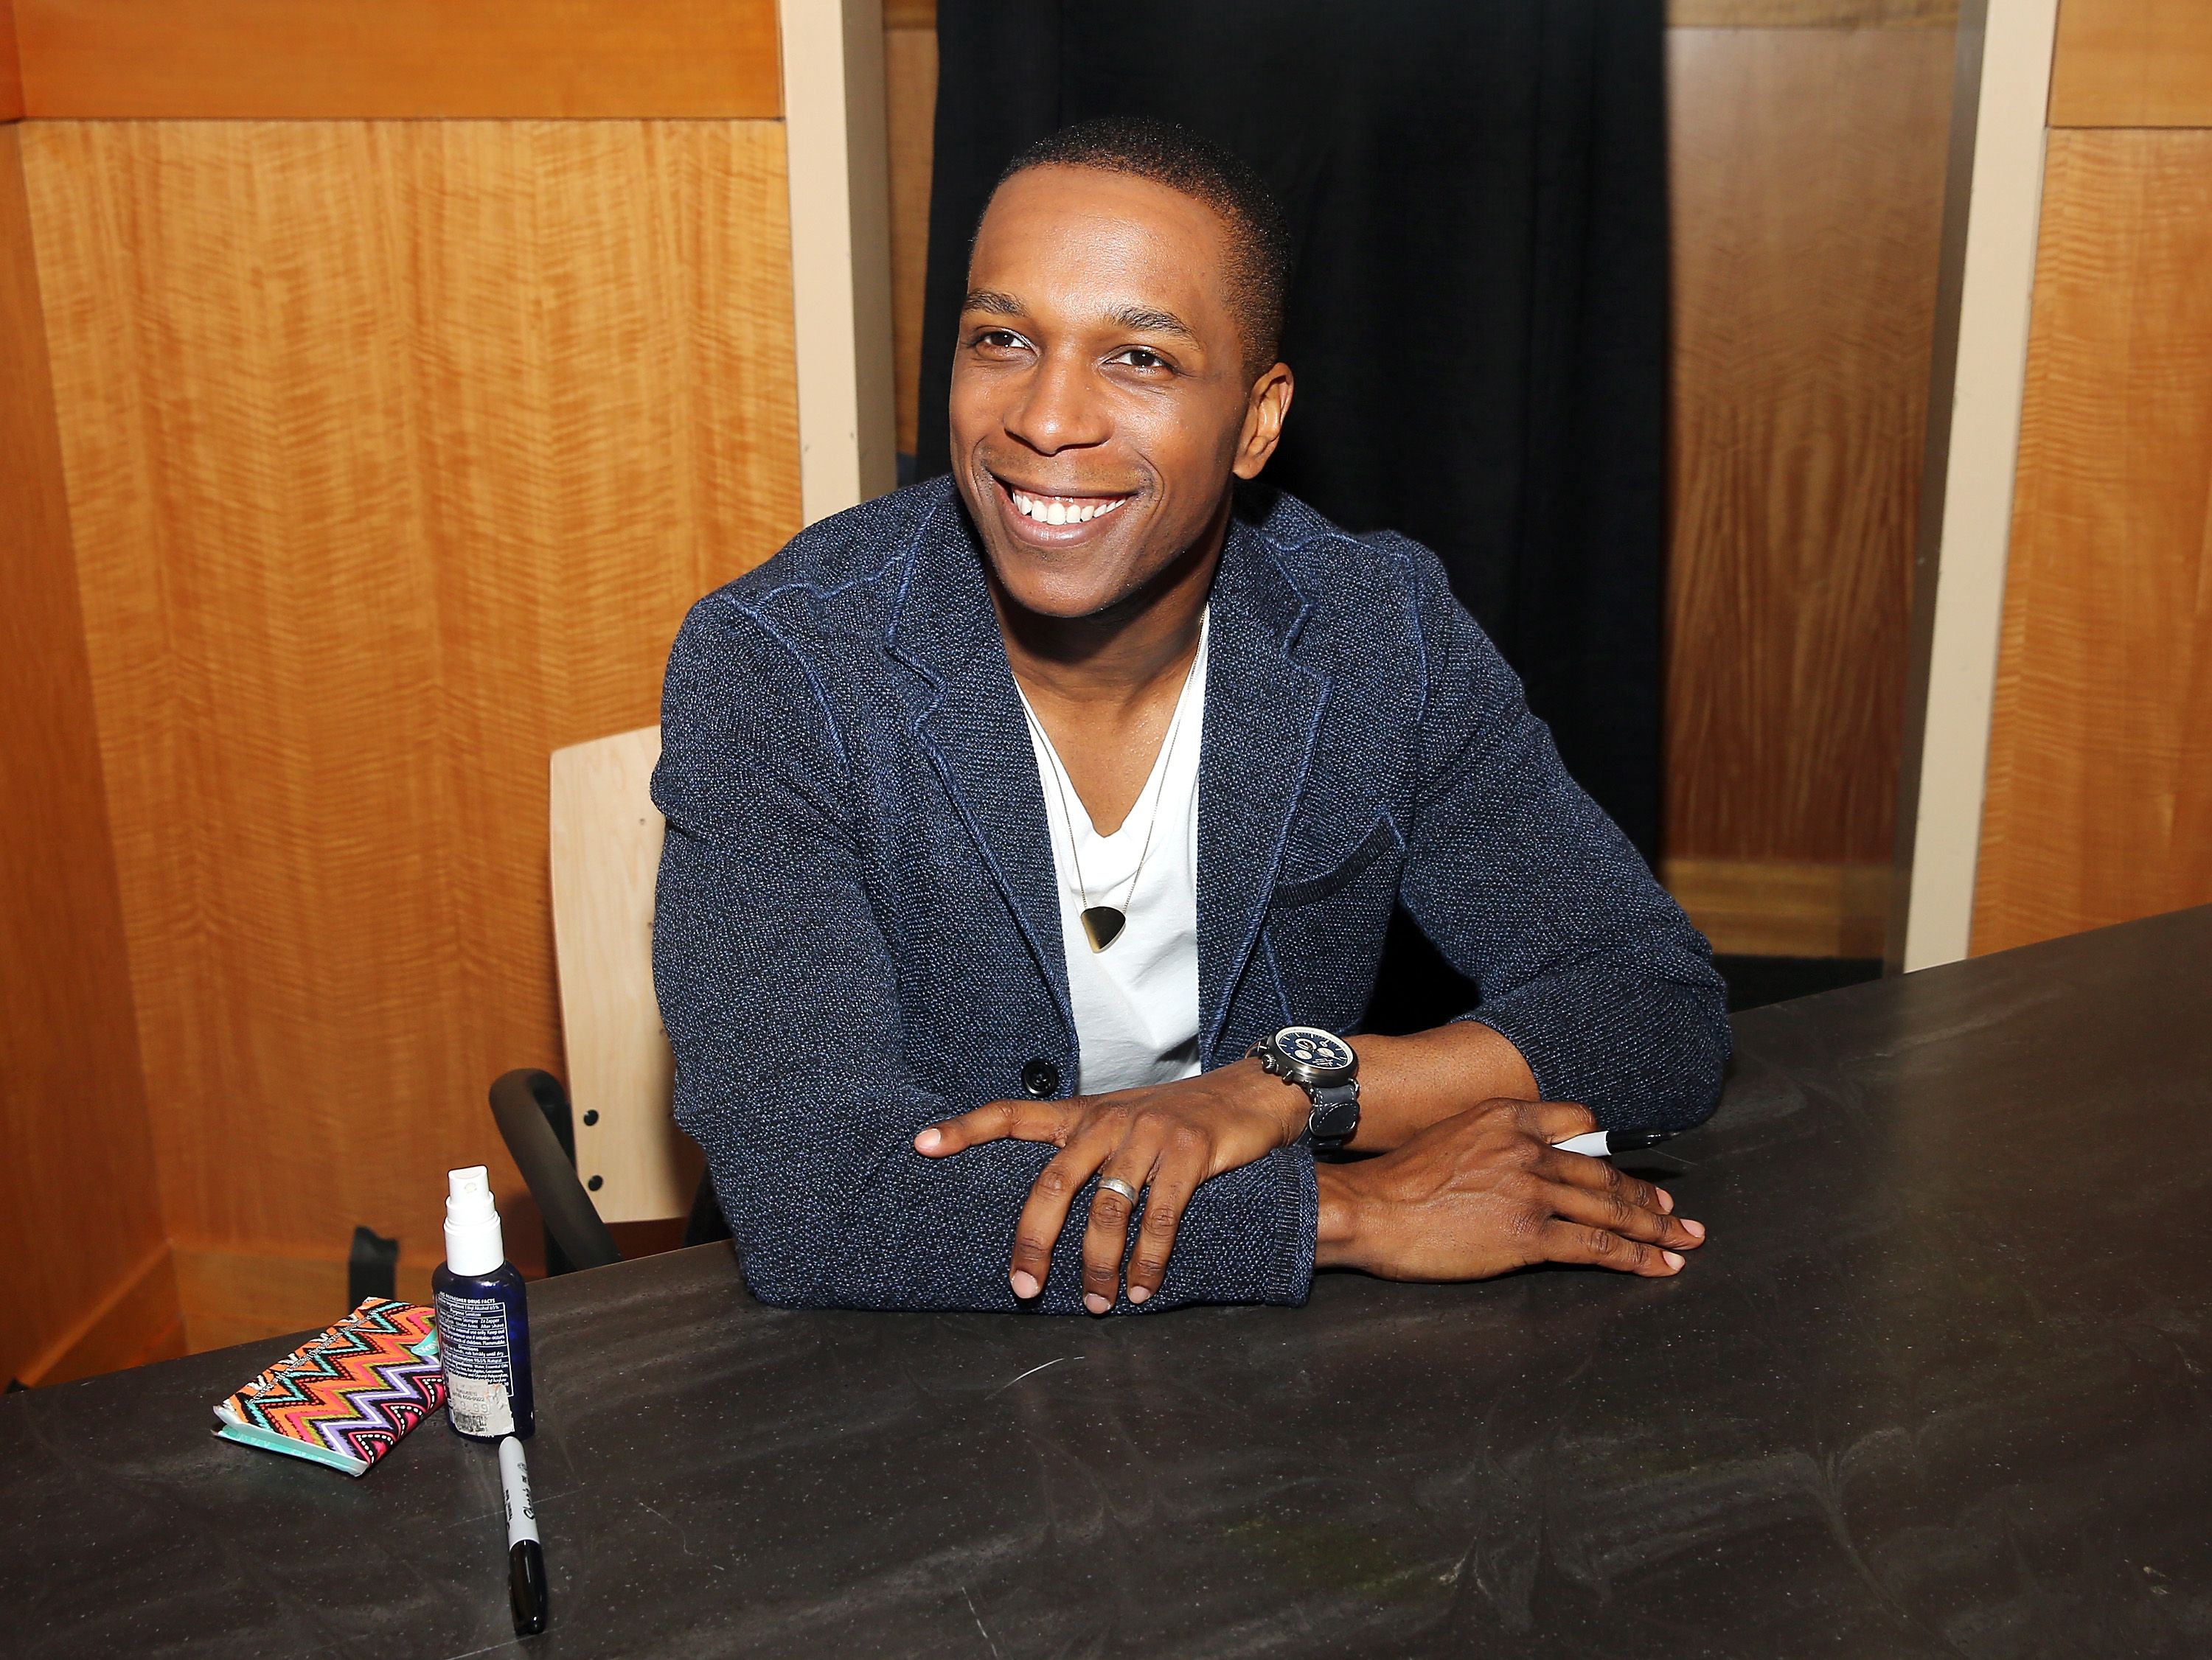 Leslie Odom Jr.  during the CD signing for his CD "Leslie Odom Jr" at Barnes & Noble, 86th & Lexington on July 11, 2016 in New York City. | Source: Getty Images